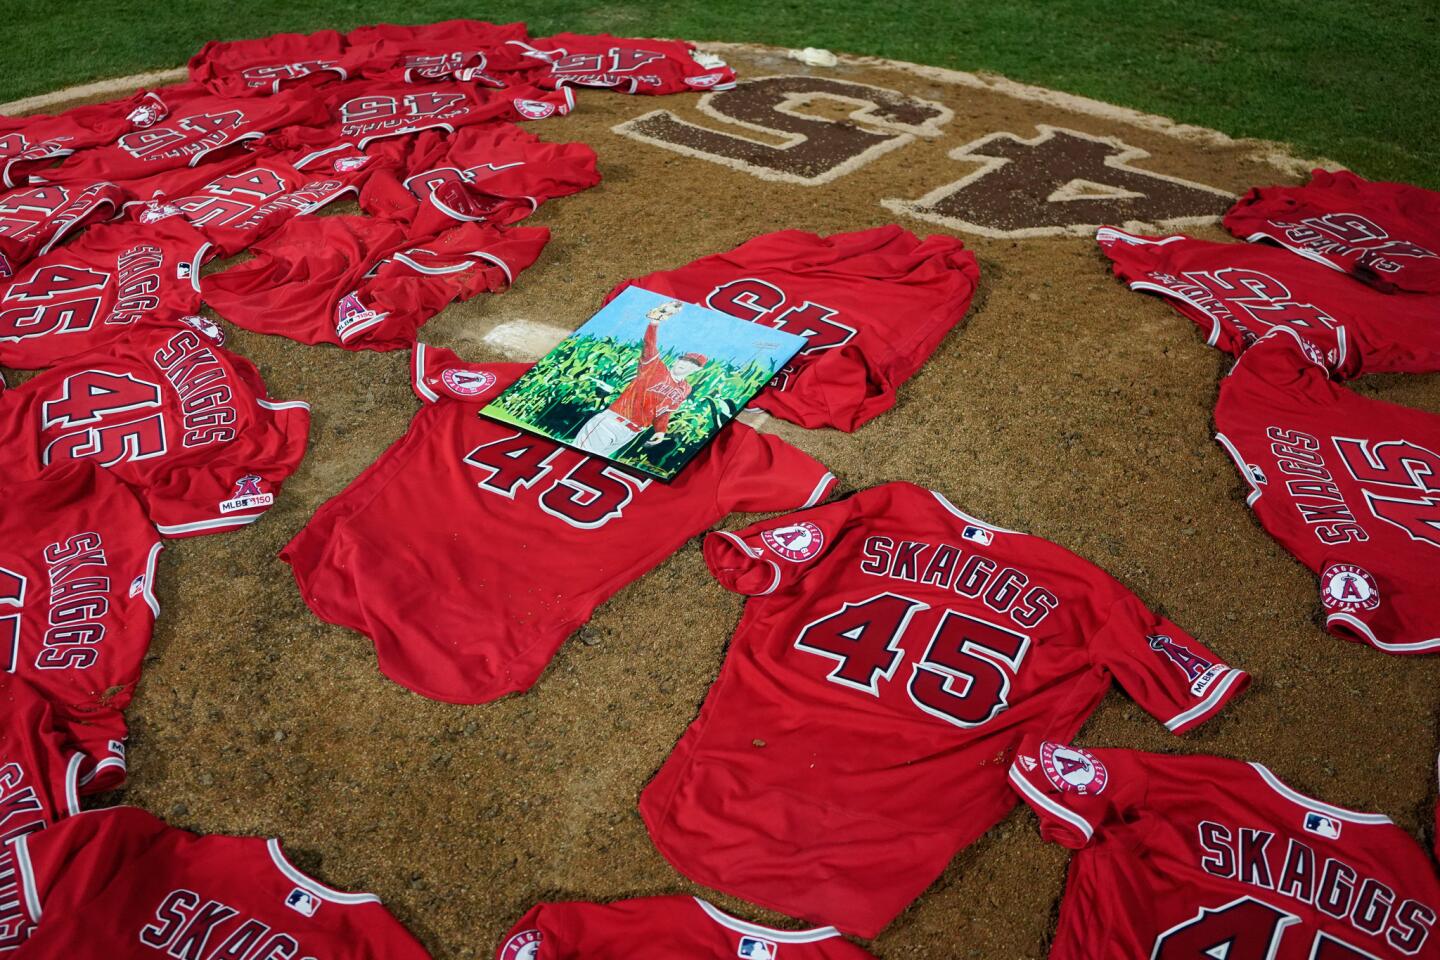 Angels pitcher Tyler Skaggs died of fentanyl, oxycodone, alcohol mixture,  coroner says – Daily Democrat